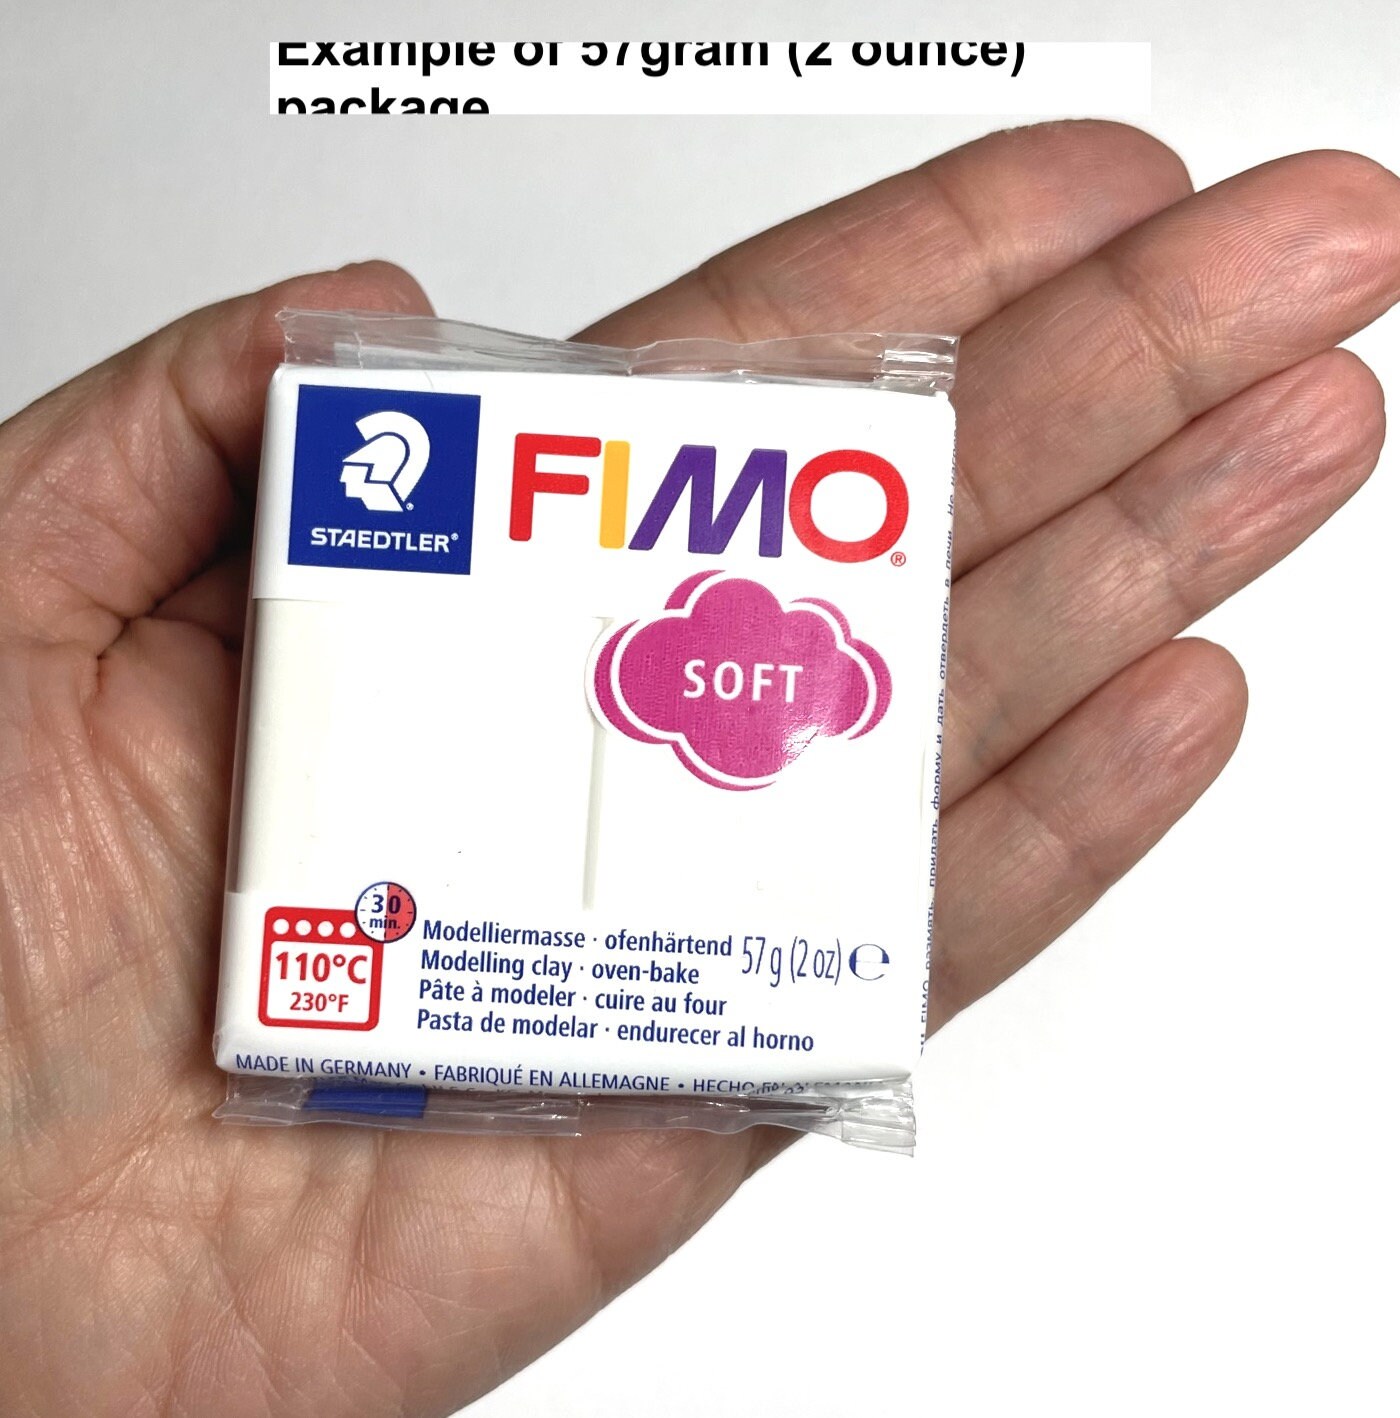 FIMO Soft 454g Polymer Modelling Clay Oven Bake Clay Set of 5 Black 